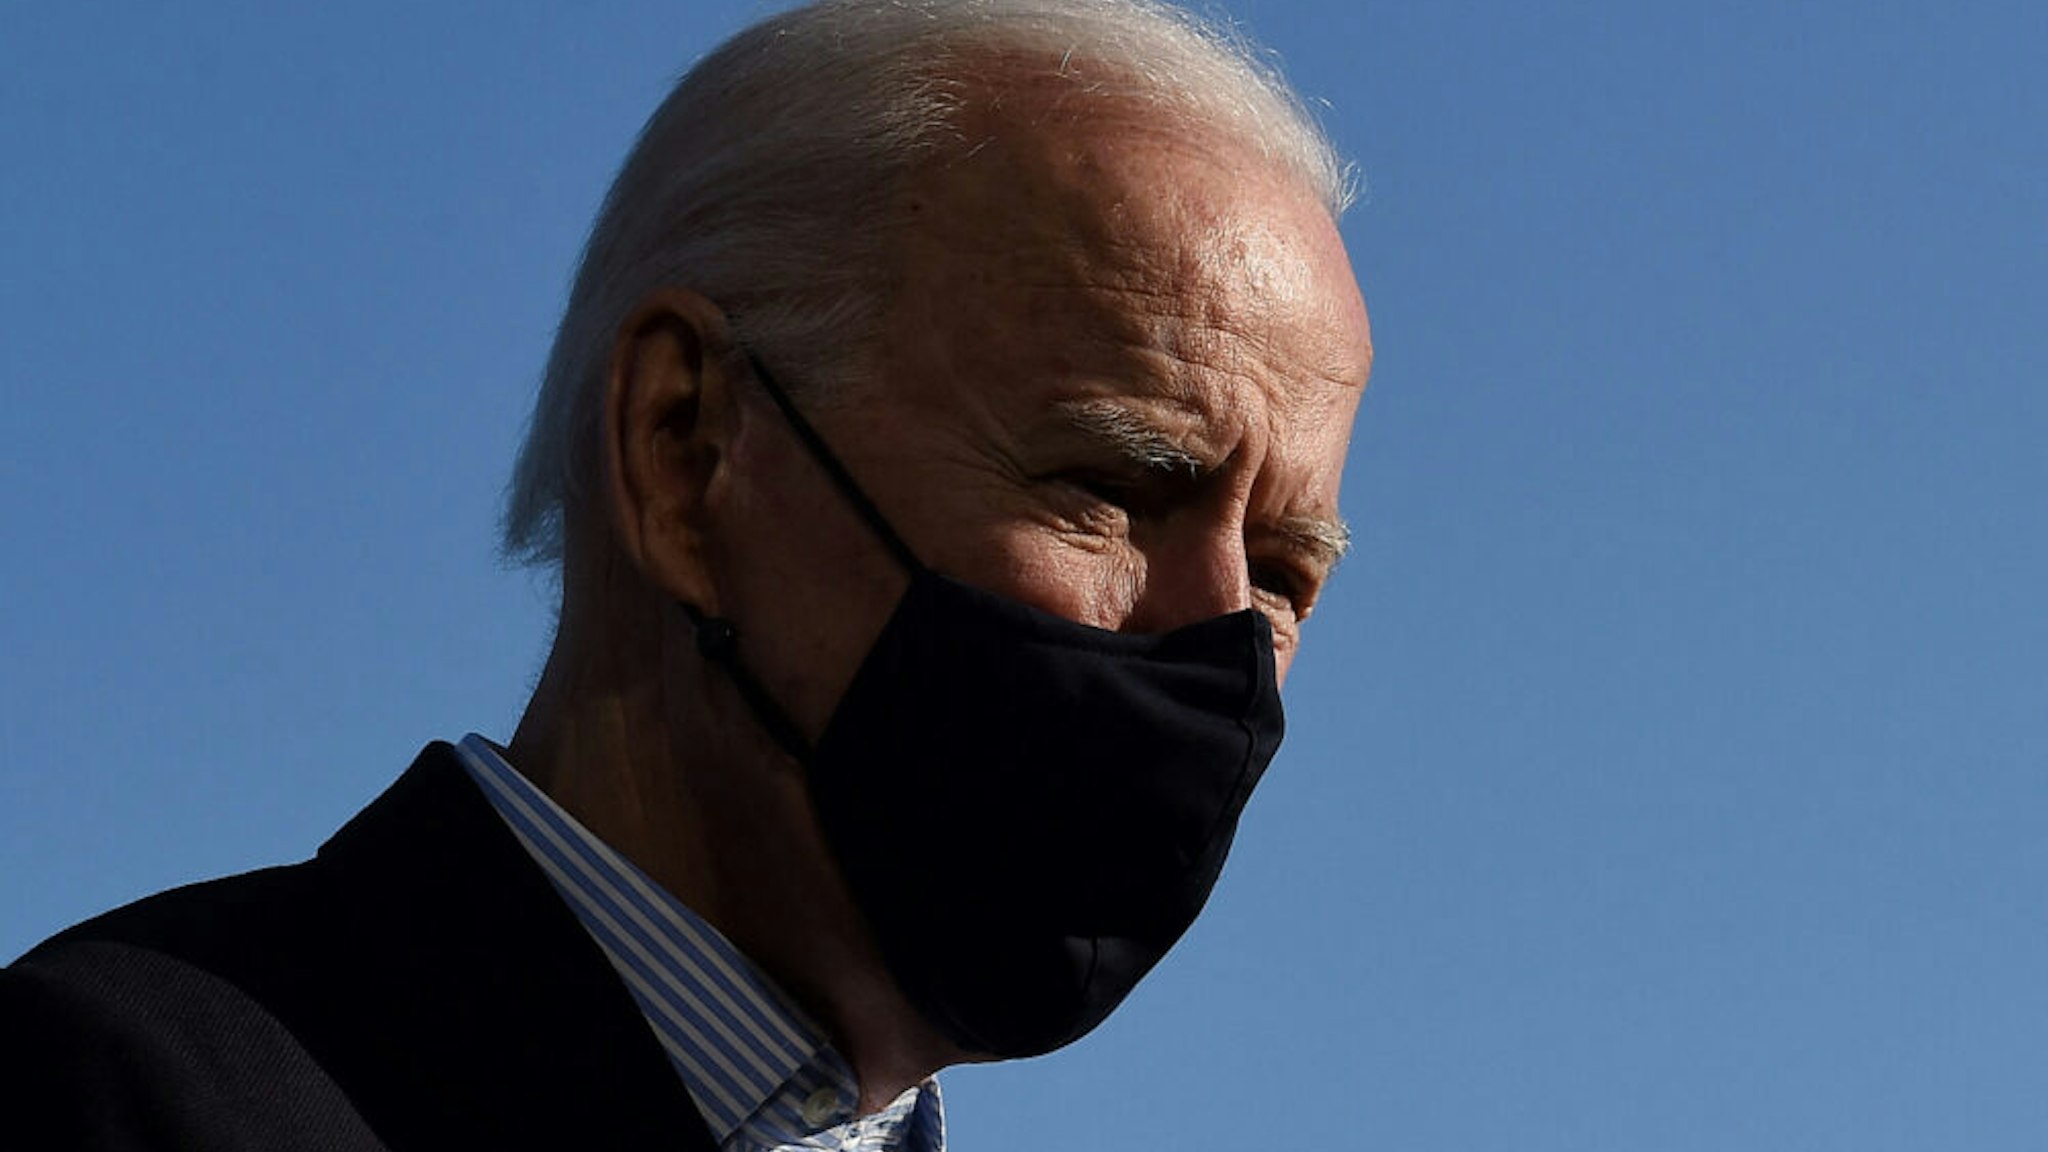 US President Joe Biden talks briefly with reporters upon his return from Camp David, Maryland to the White House in Washington, DC on March 21, 2021.